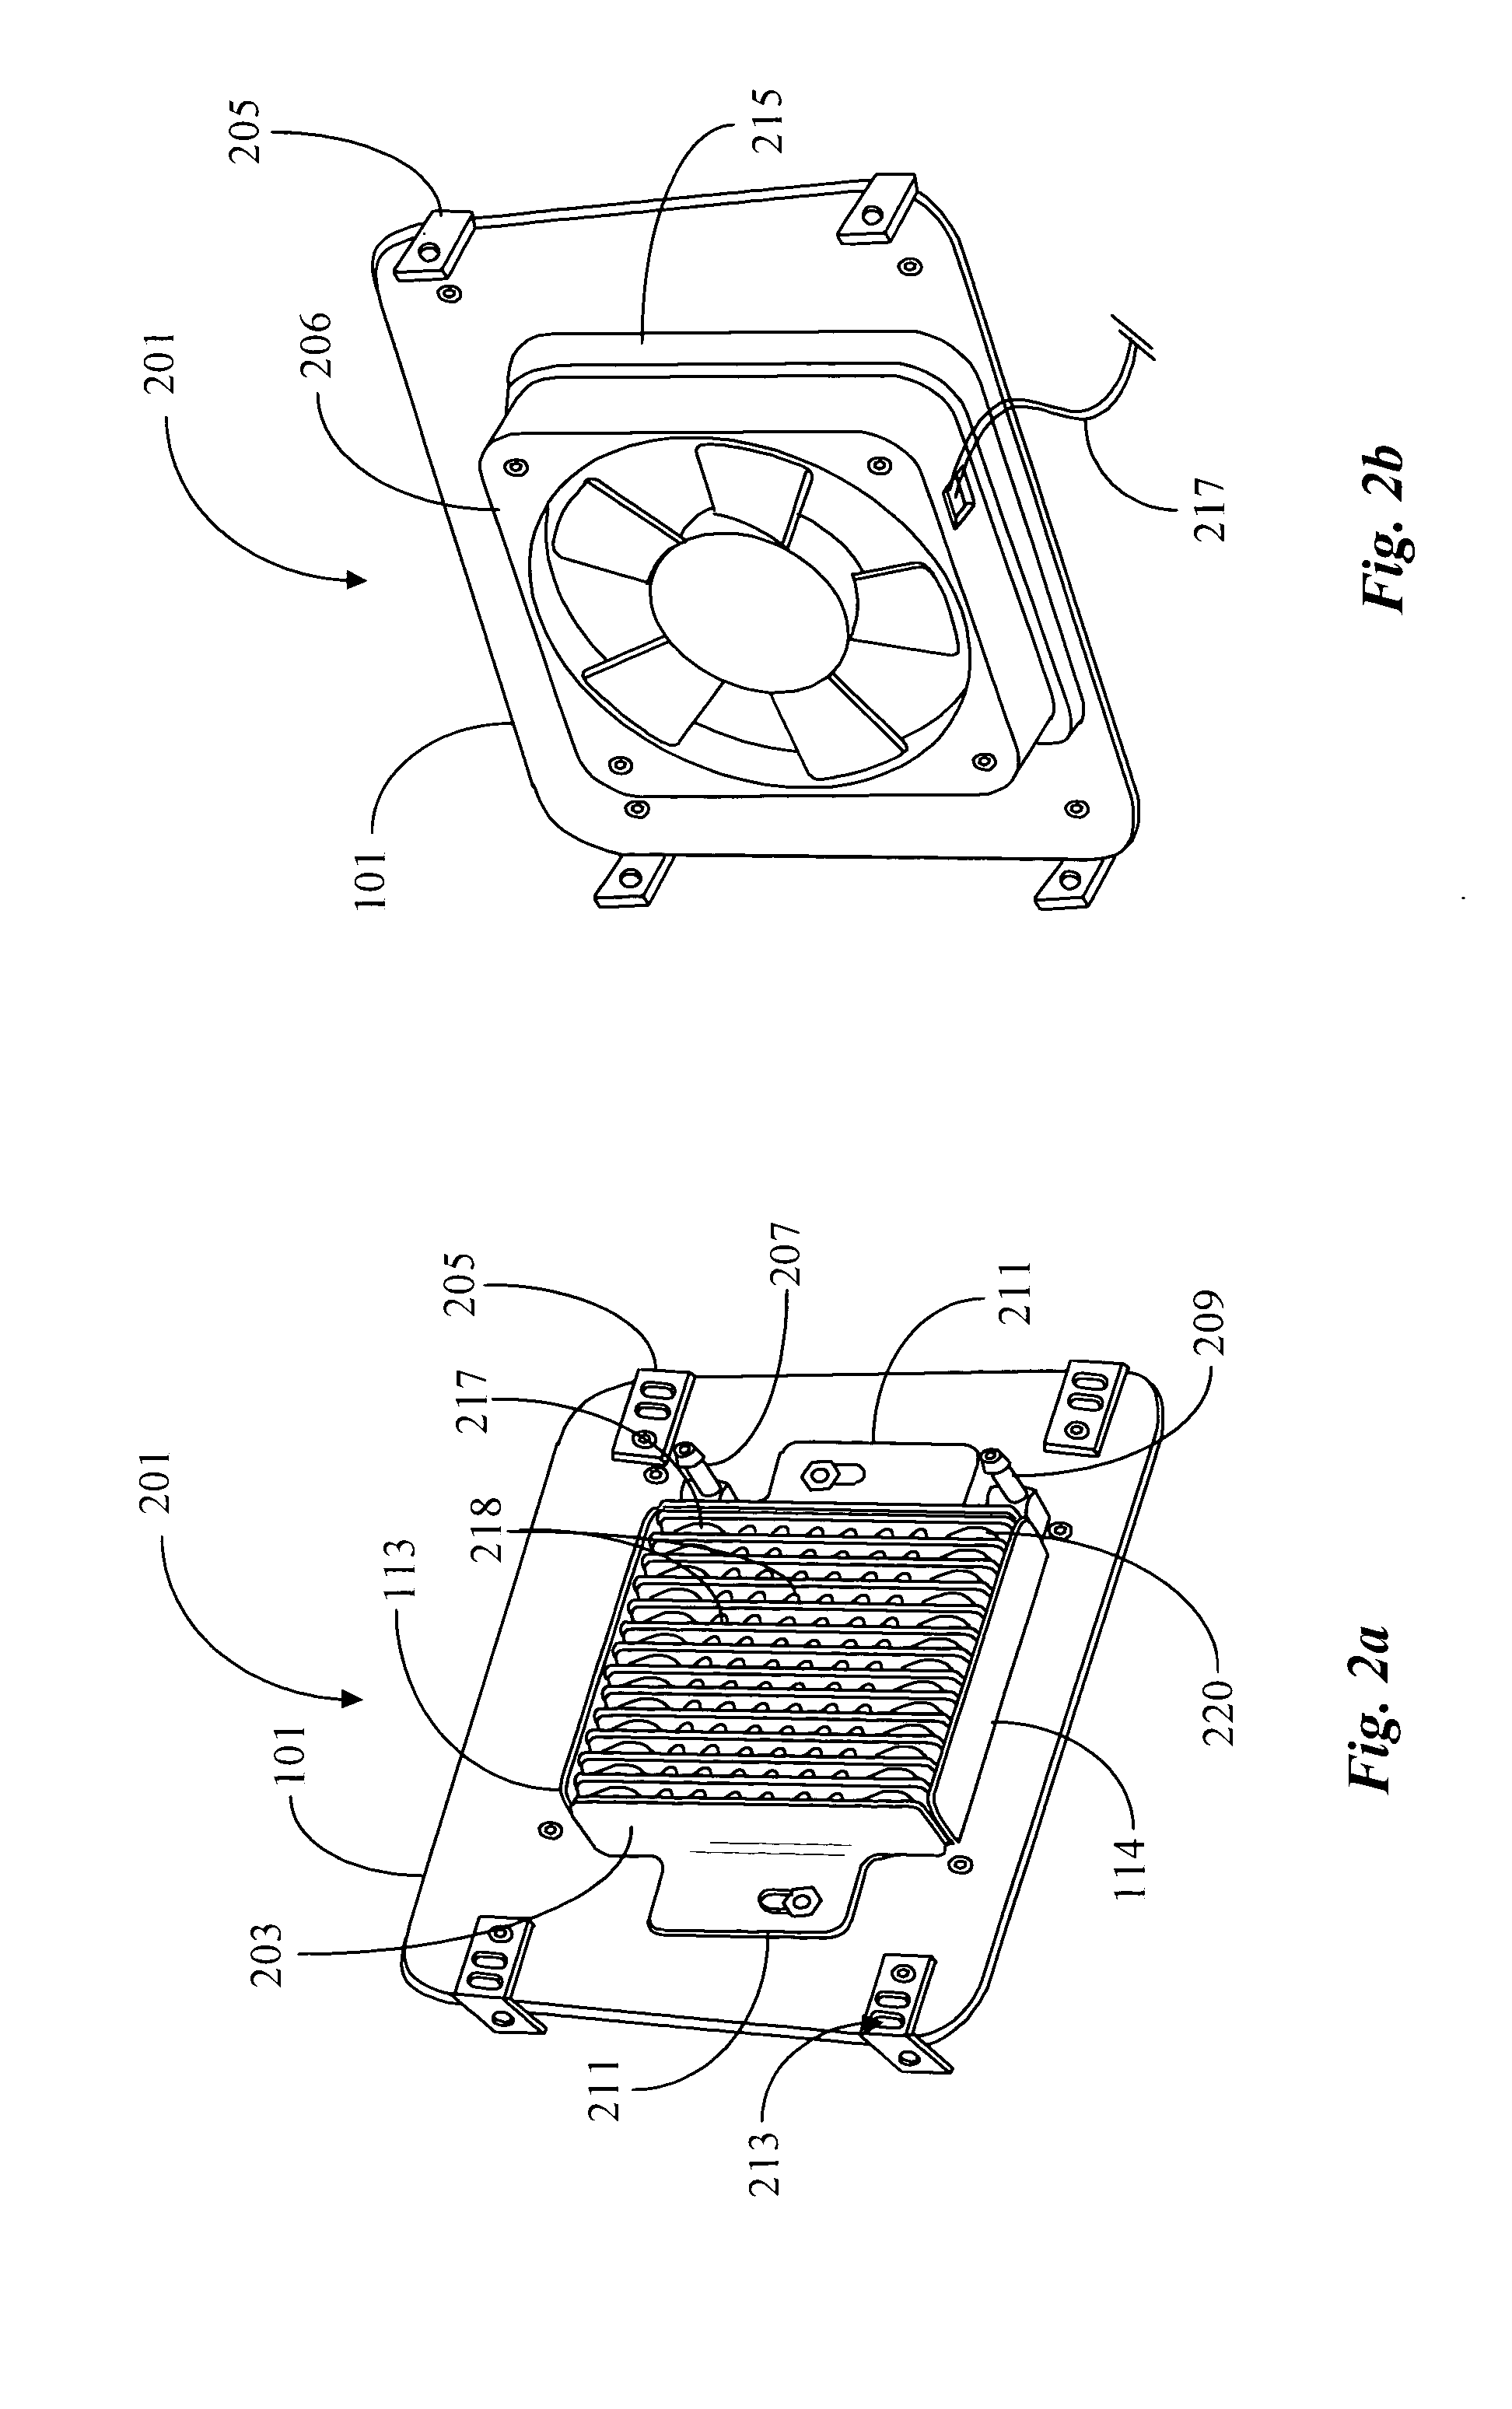 Method and apparatus for efficiently cooling motocycle engines